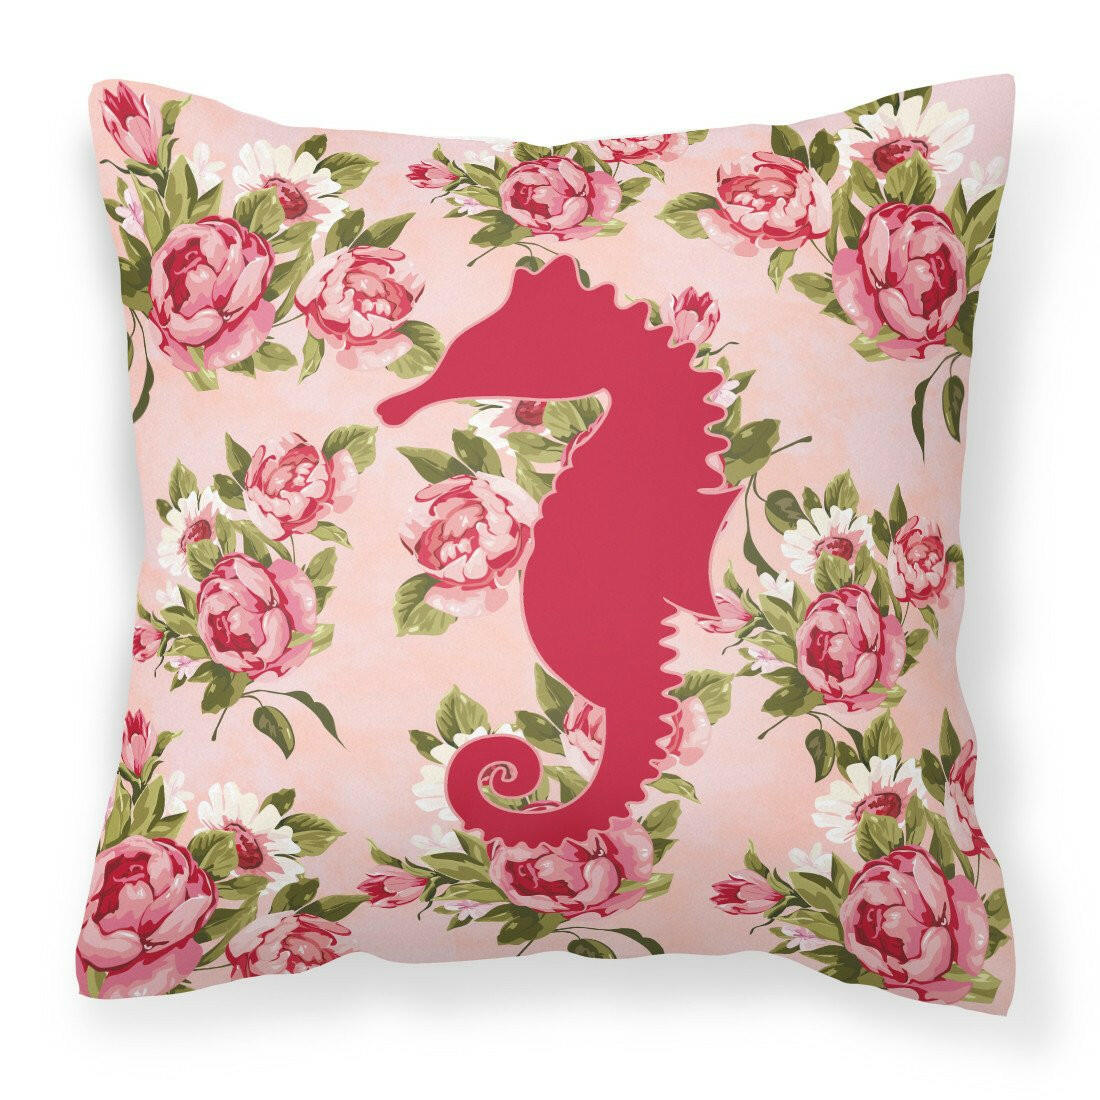 Sea Horse Shabby Chic Pink Roses  Fabric Decorative Pillow BB1018-RS-PK-PW1414 - the-store.com